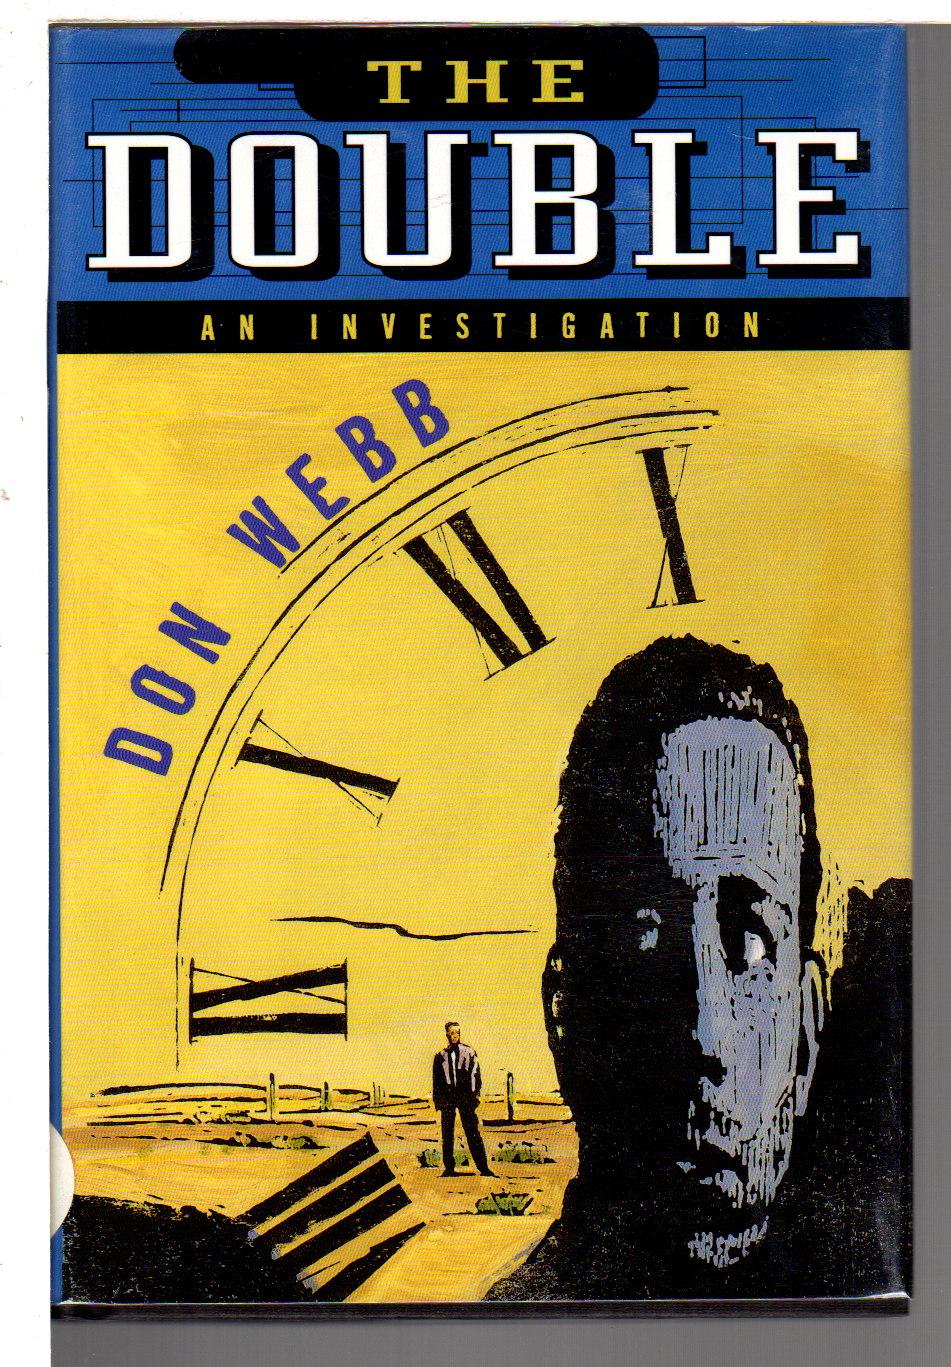 THE DOUBLE: An Investigation. - Webb, Don,